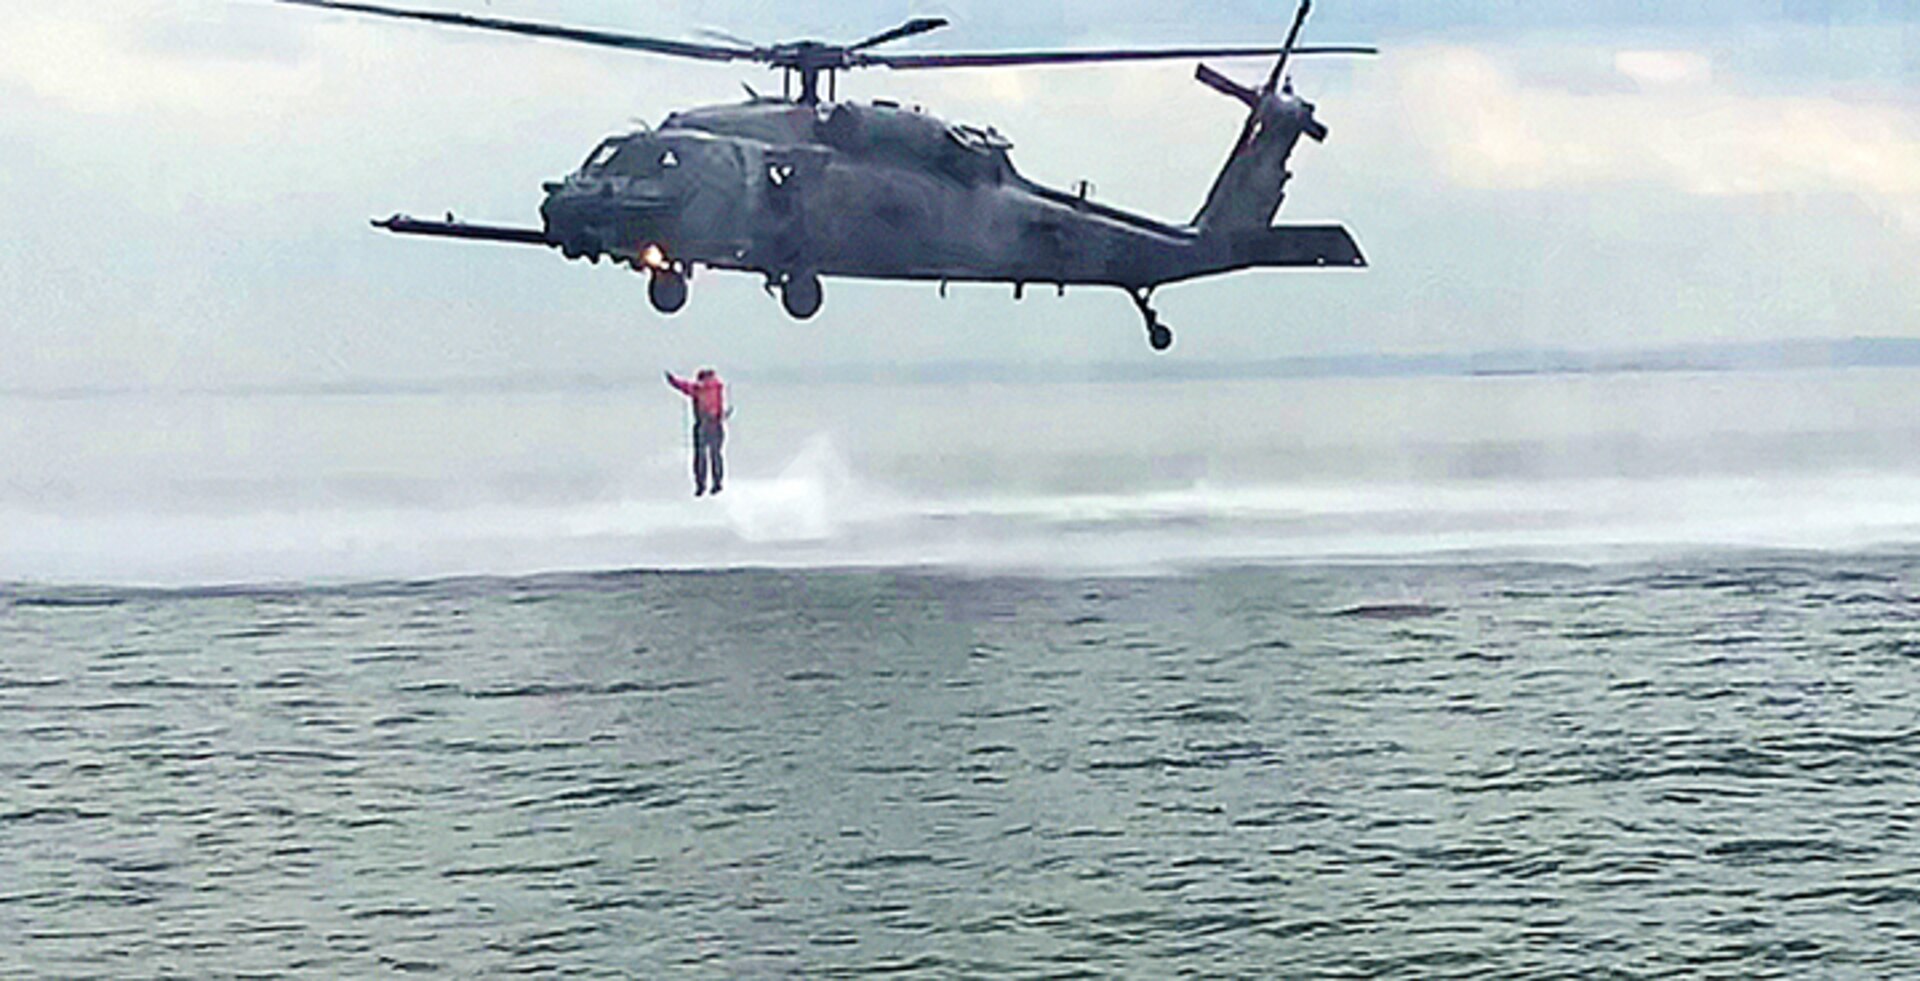 A member of the New York National Guard's 24th Weapons of Mass Destruction Civil Support Team exists a hovering HH-60 Pave Hawk helicopter assigned to the 106th Rescue Wing during helocasting training off Fort Hamilton, Brooklyn in Gravesends Bay on June 6, 2018.